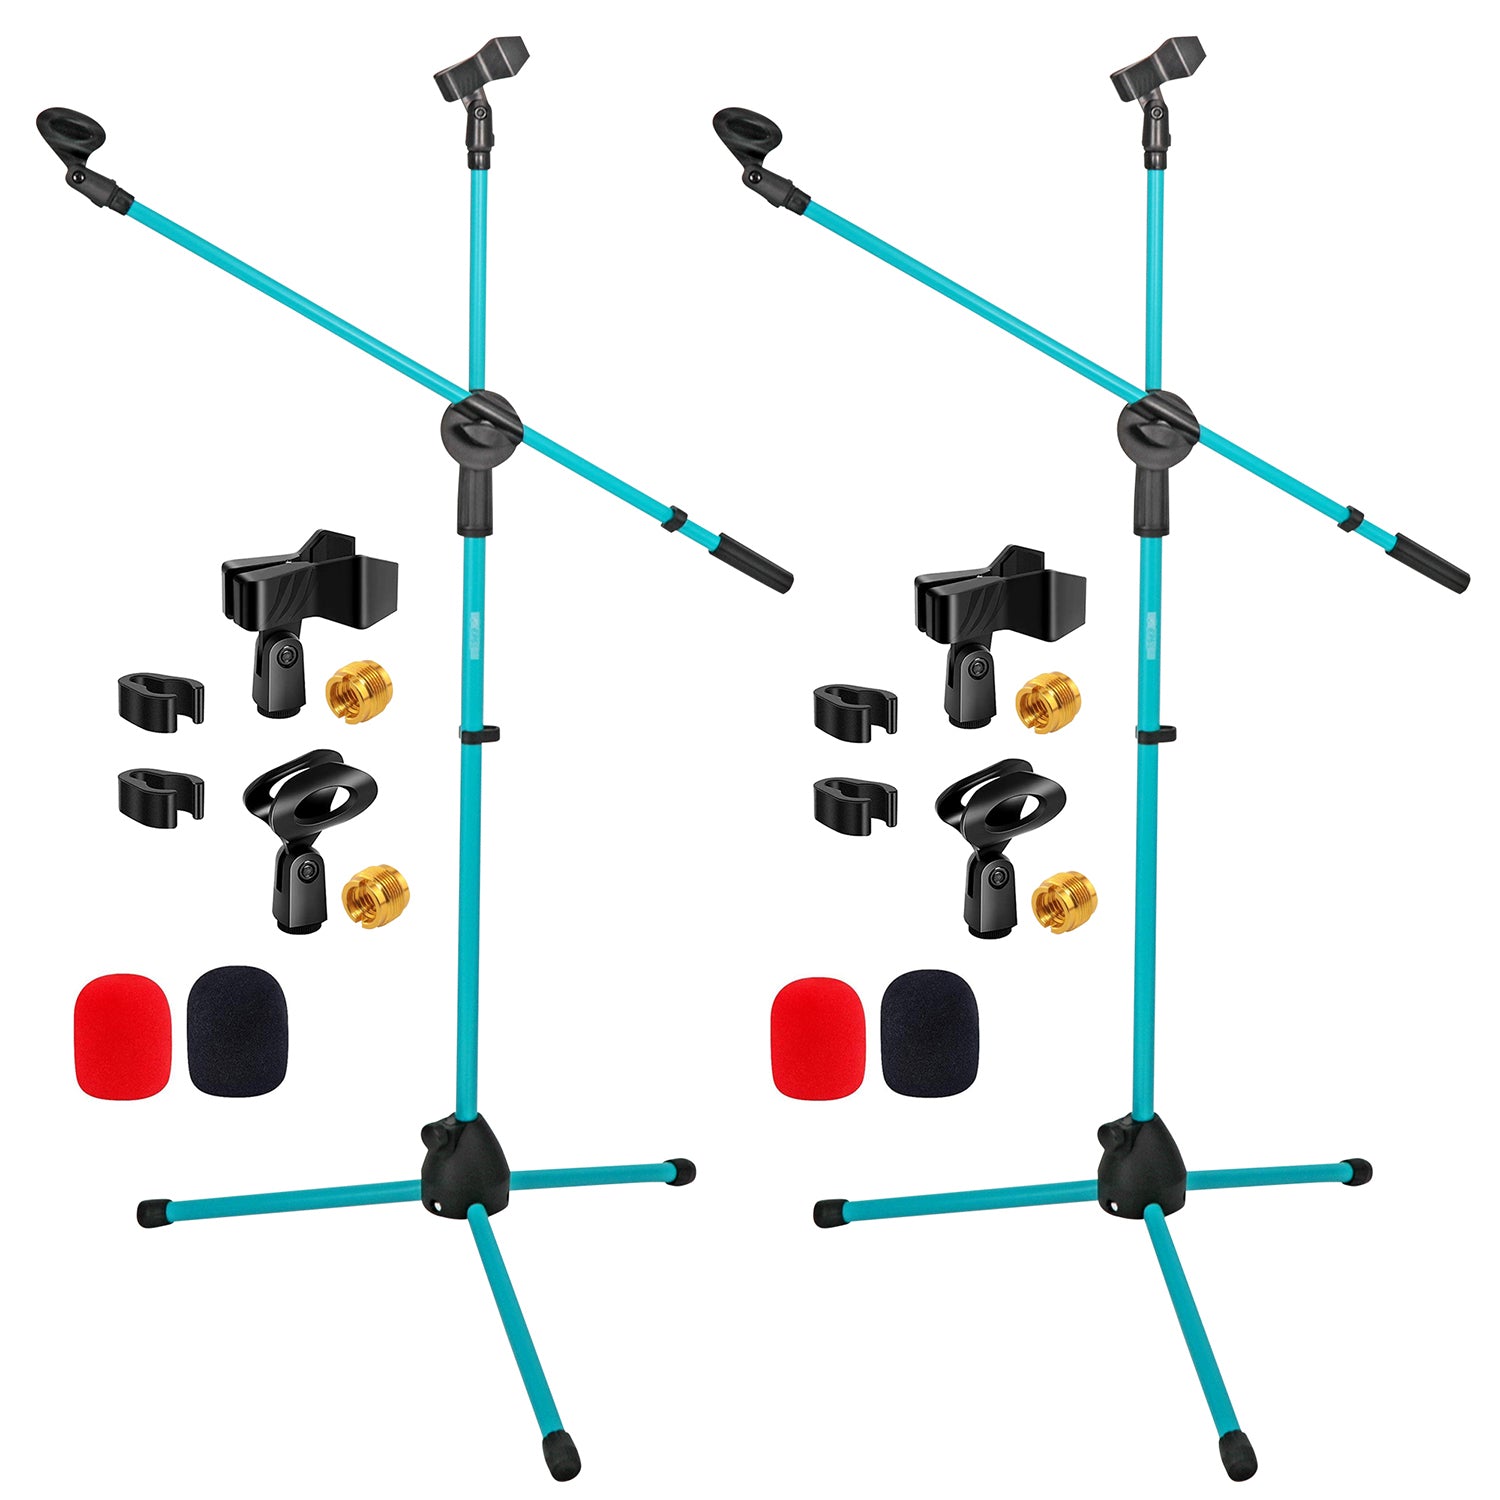 5Core Tripod Mic Stand Height Adjustable Universal Microphone Mount Floor Stands w Boom 1/2/4 Pc